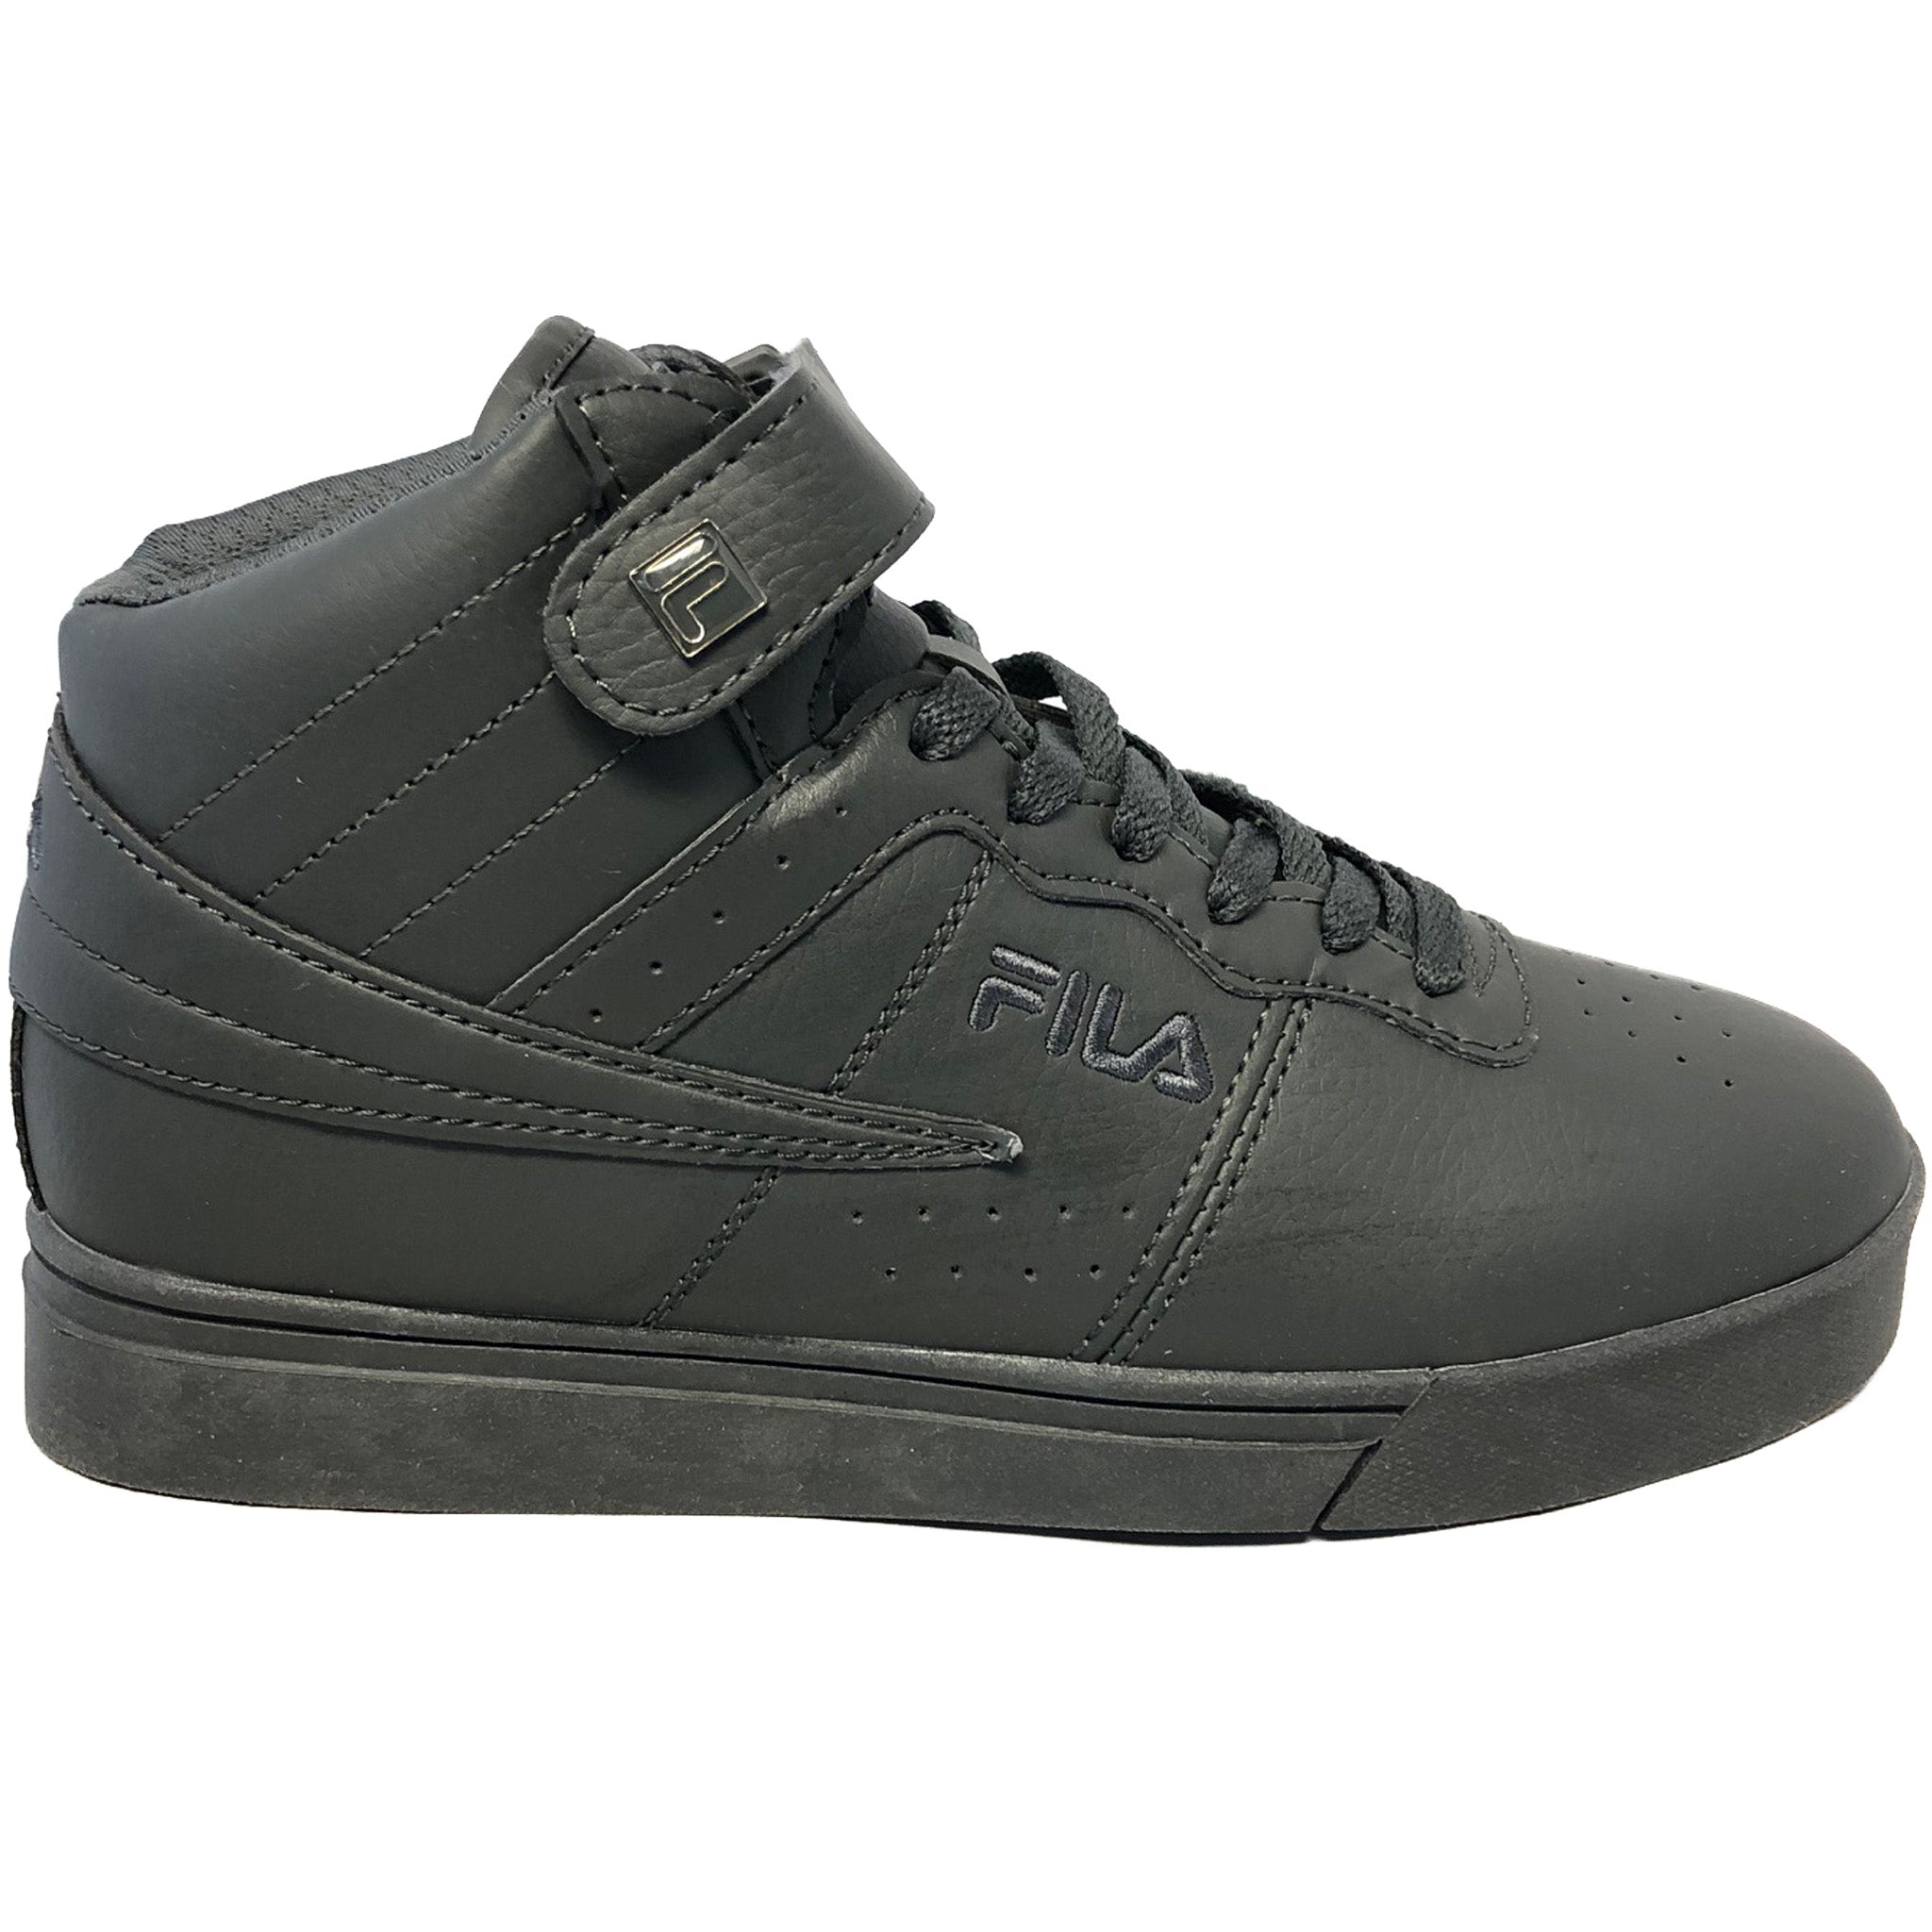 Mens Vulc 13 MP Mid Plus Tonal Casual Shoes That Shoe Store and More